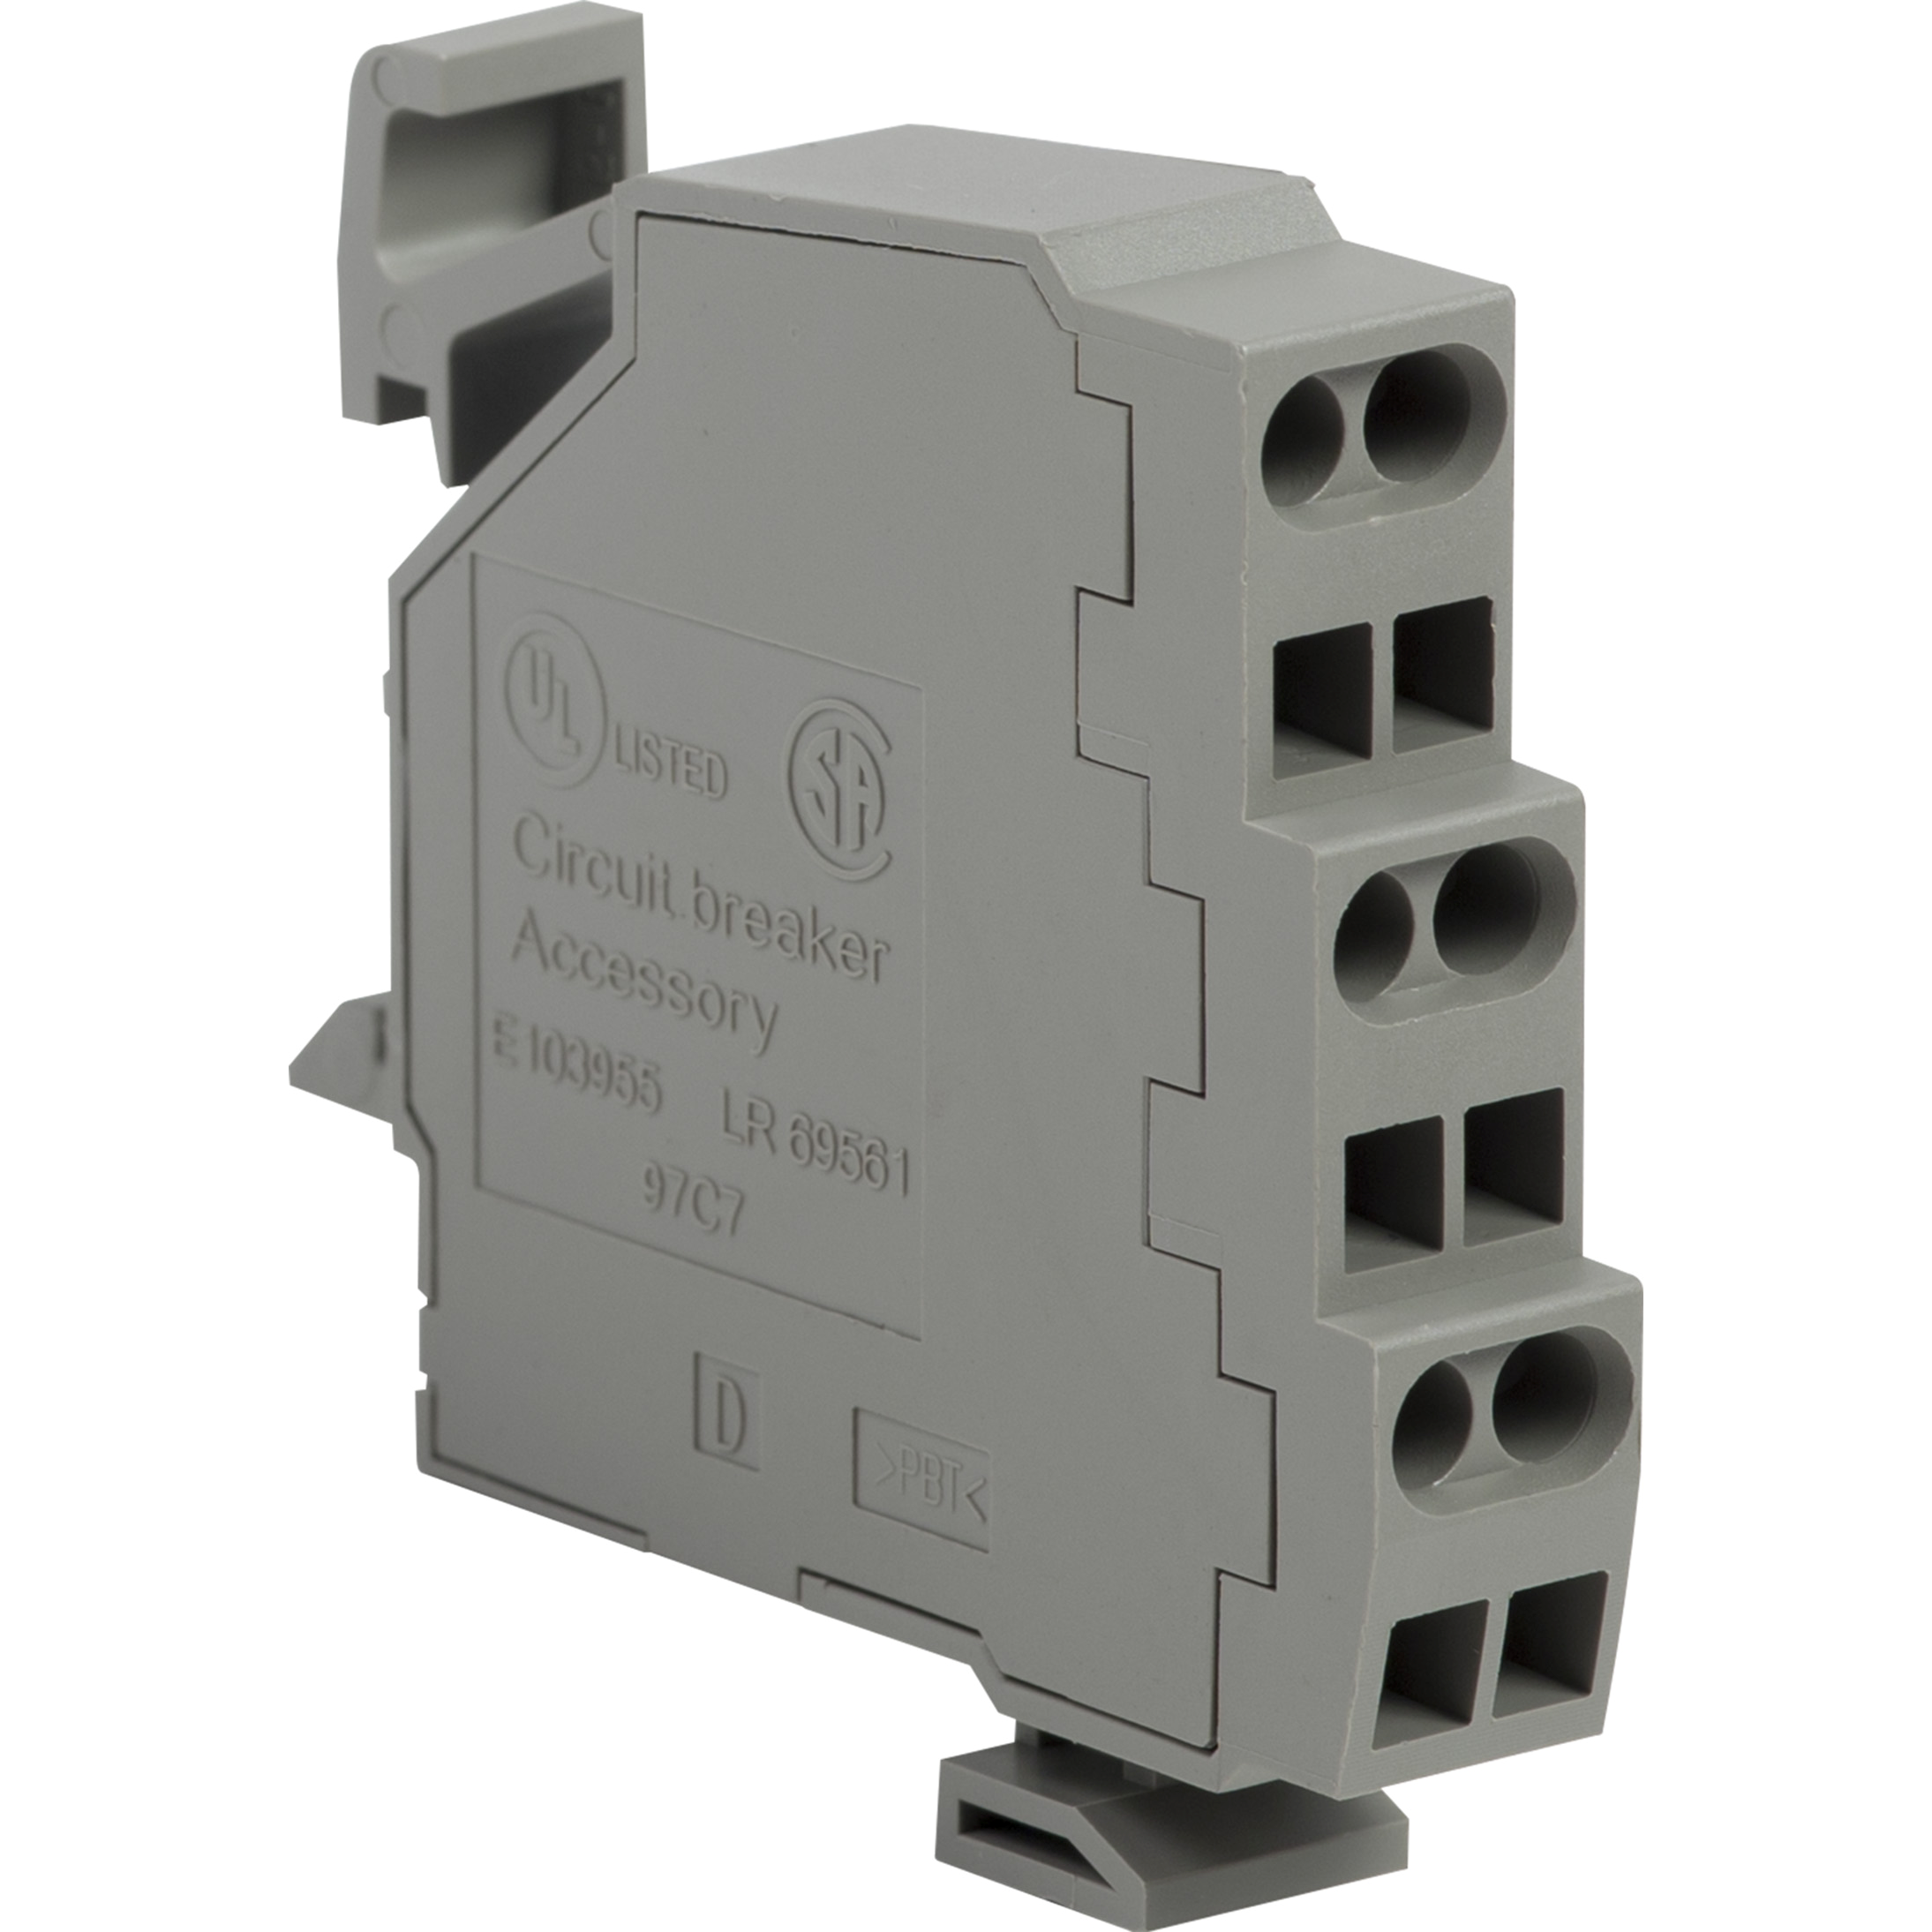 Circuit breaker accessory, PowerPacT P, cradle postion switch, 1a/1b form C, connected/test/disconnect